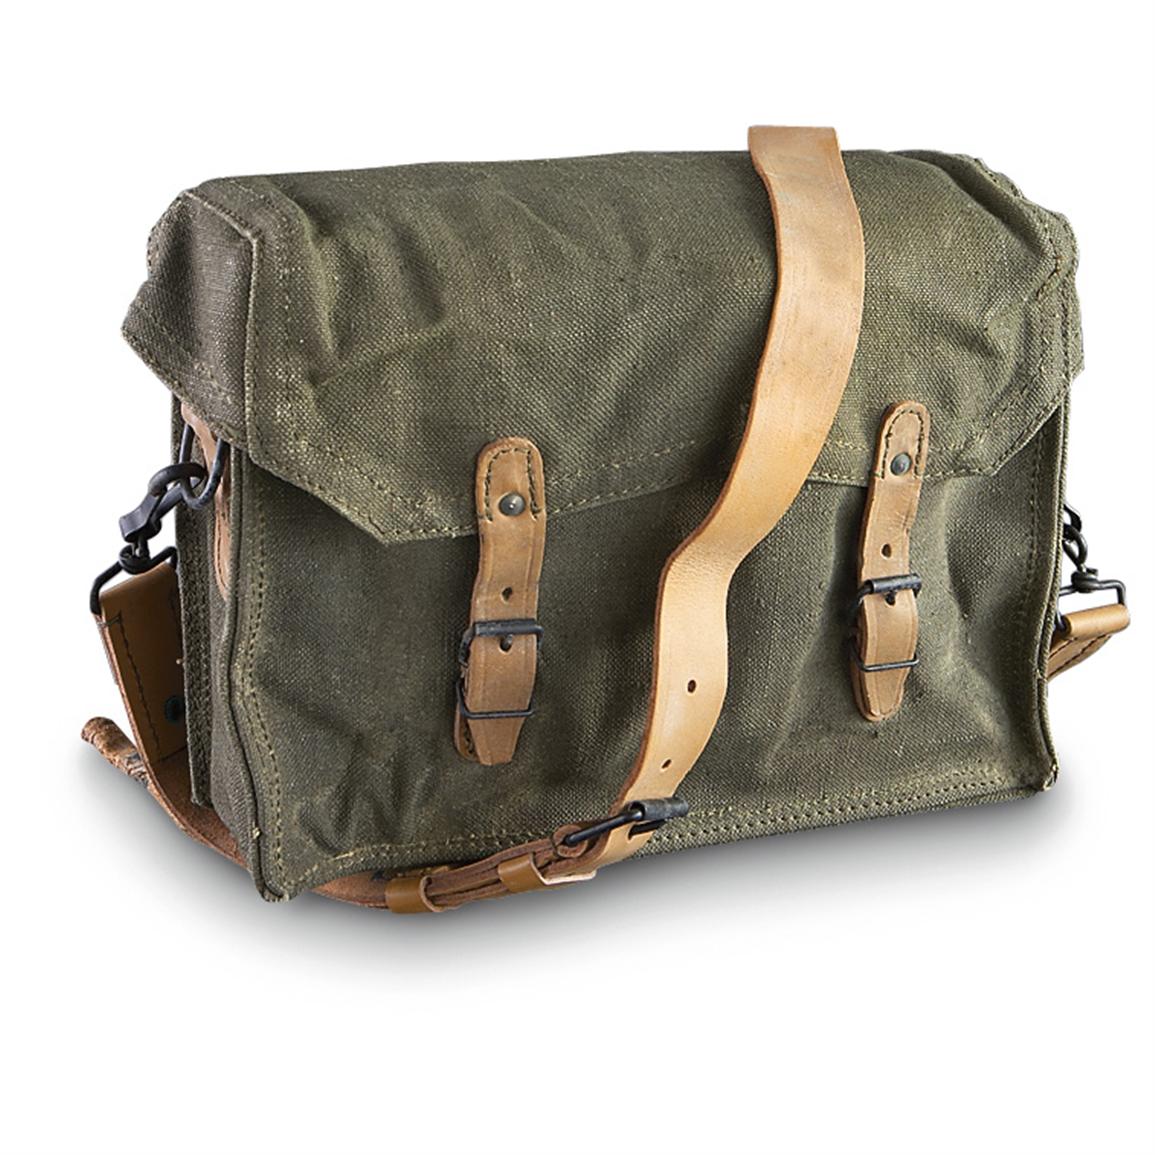 Used French Military Shoulder Bag with Leather Strap - 211003, Shoulder & Messenger Bags at ...